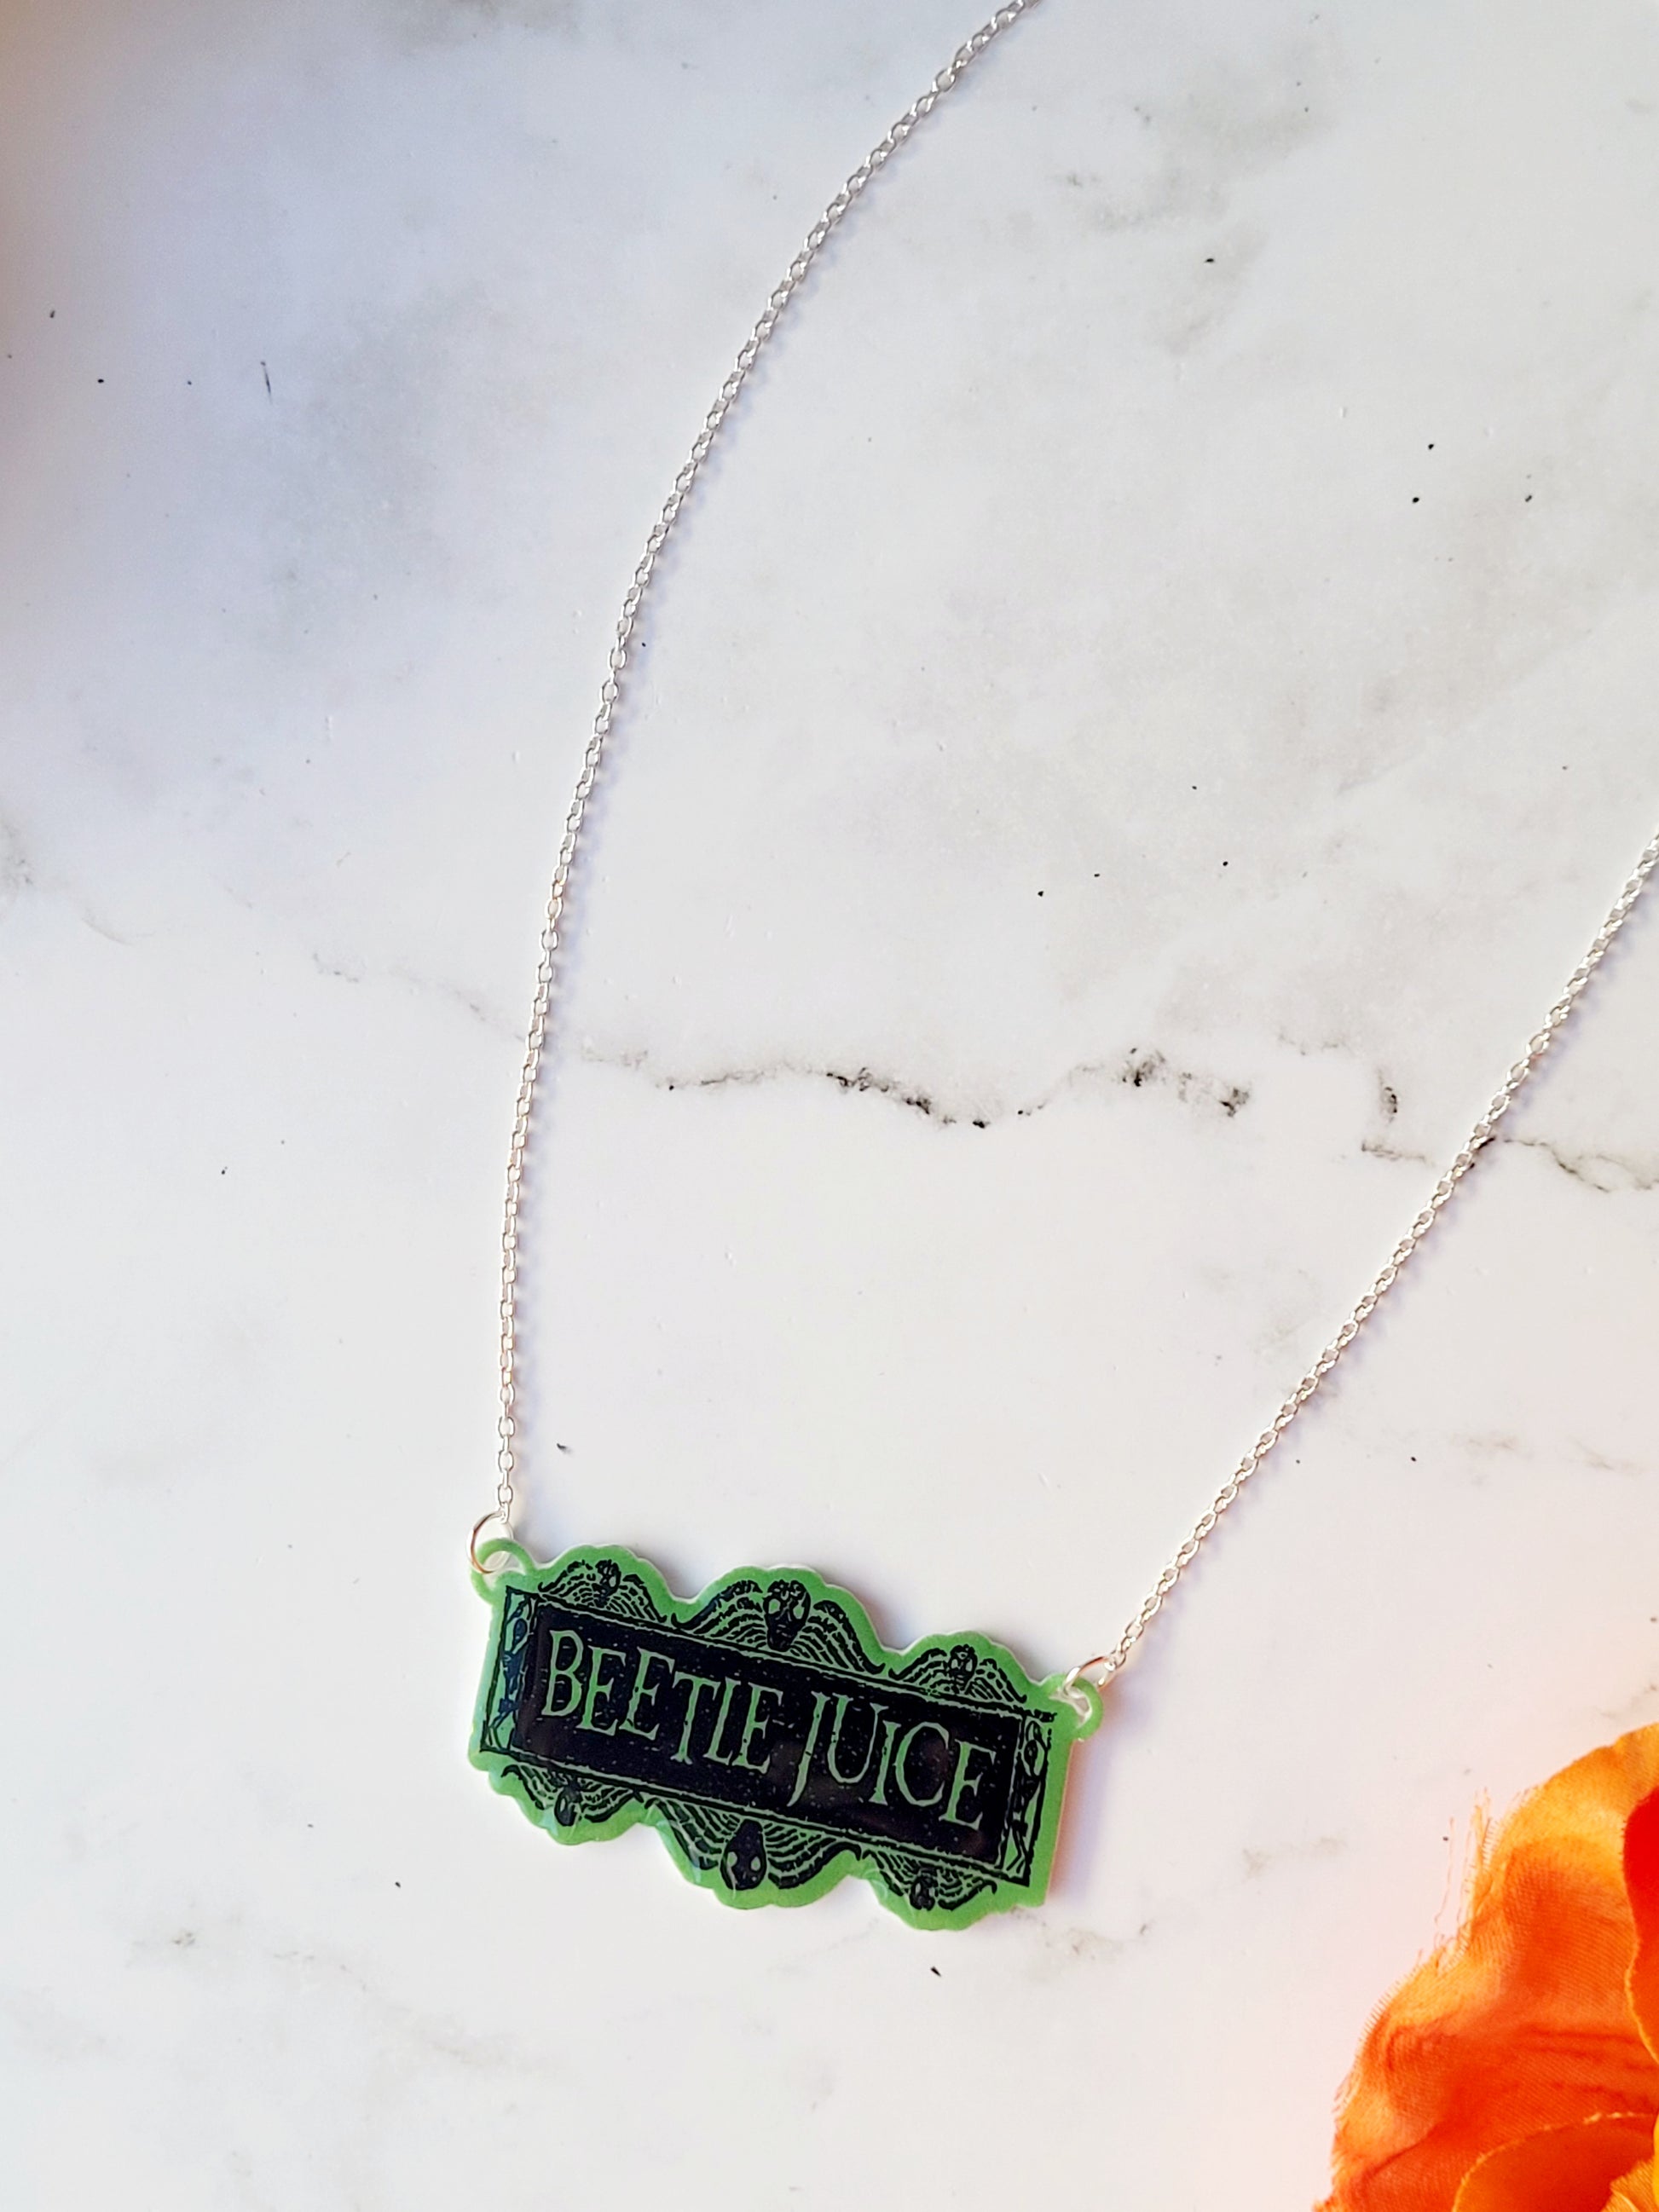 Close up of Beetlejuice logo necklace on a white marble background 